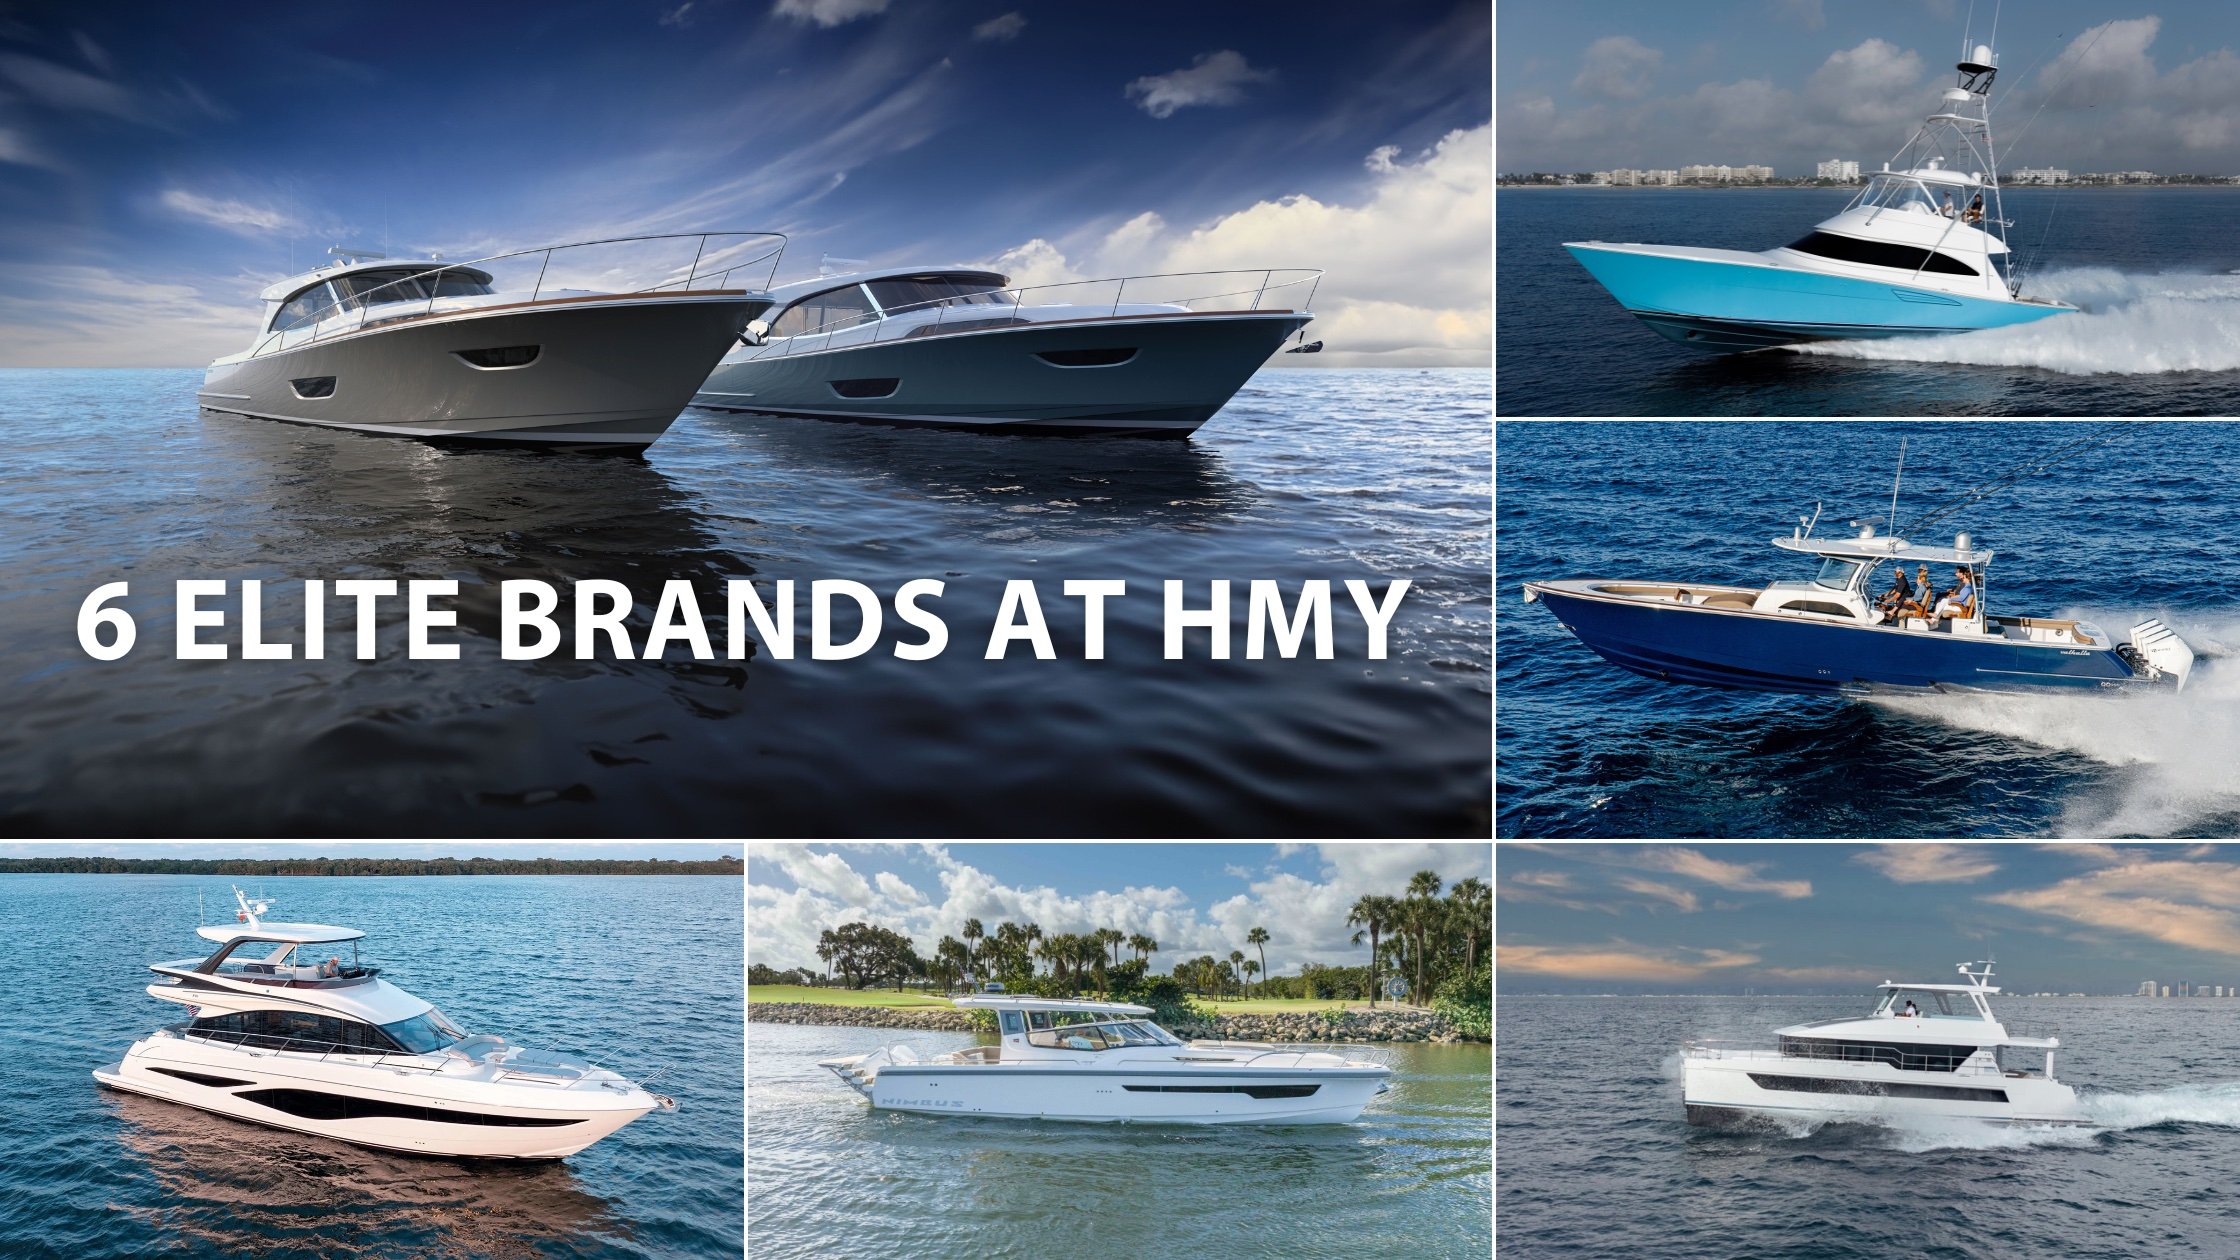 Exploring the 6 Elite Brands at HMY